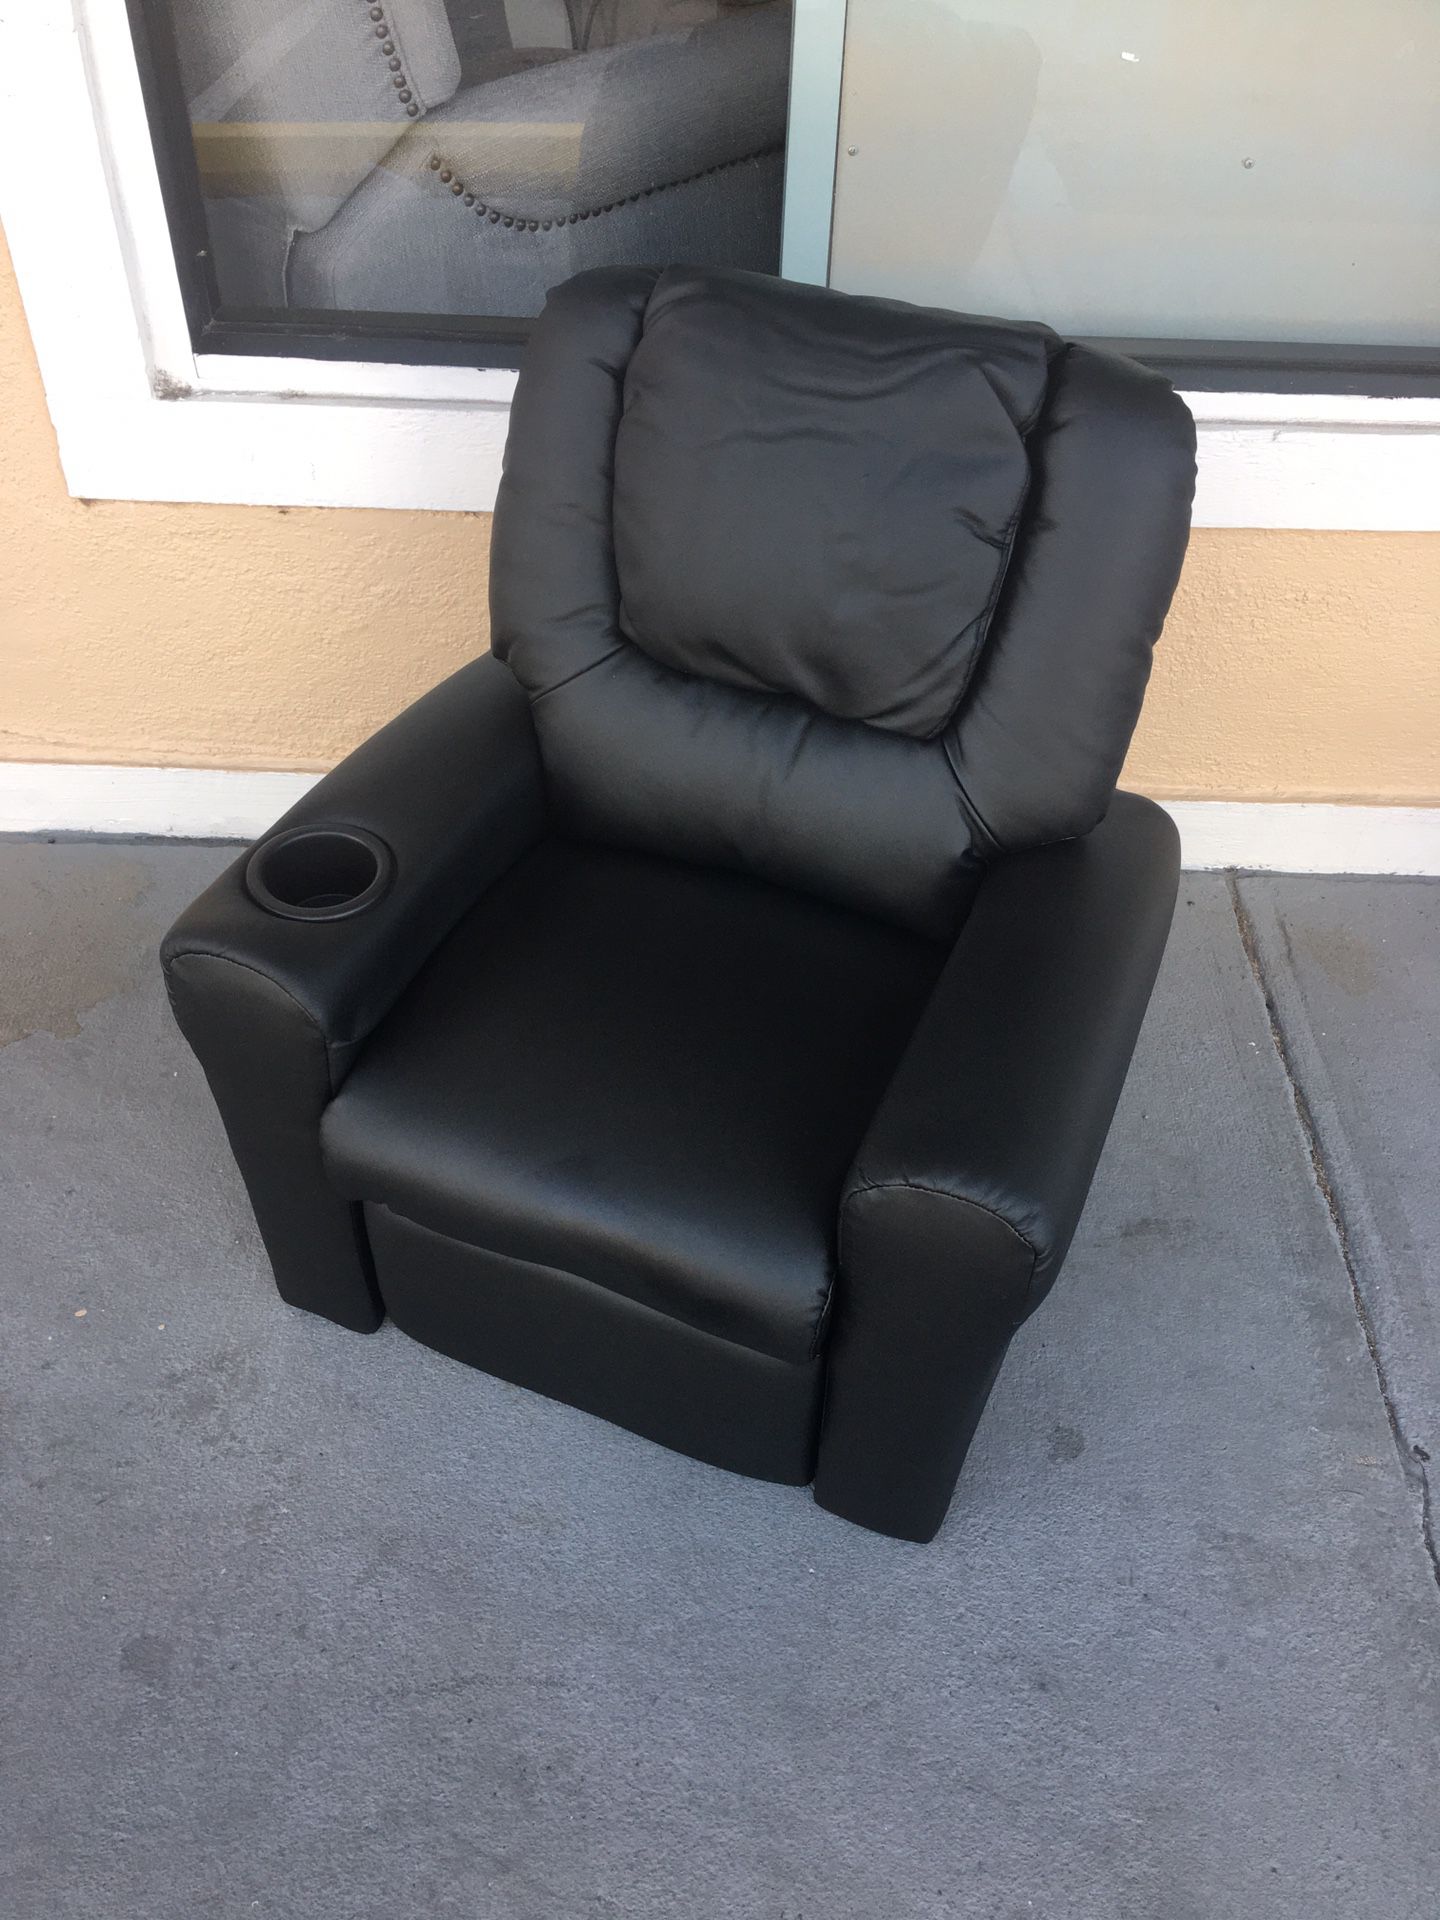 New Kids' Vinyl Recliner with Cupholder and Headrest, Black